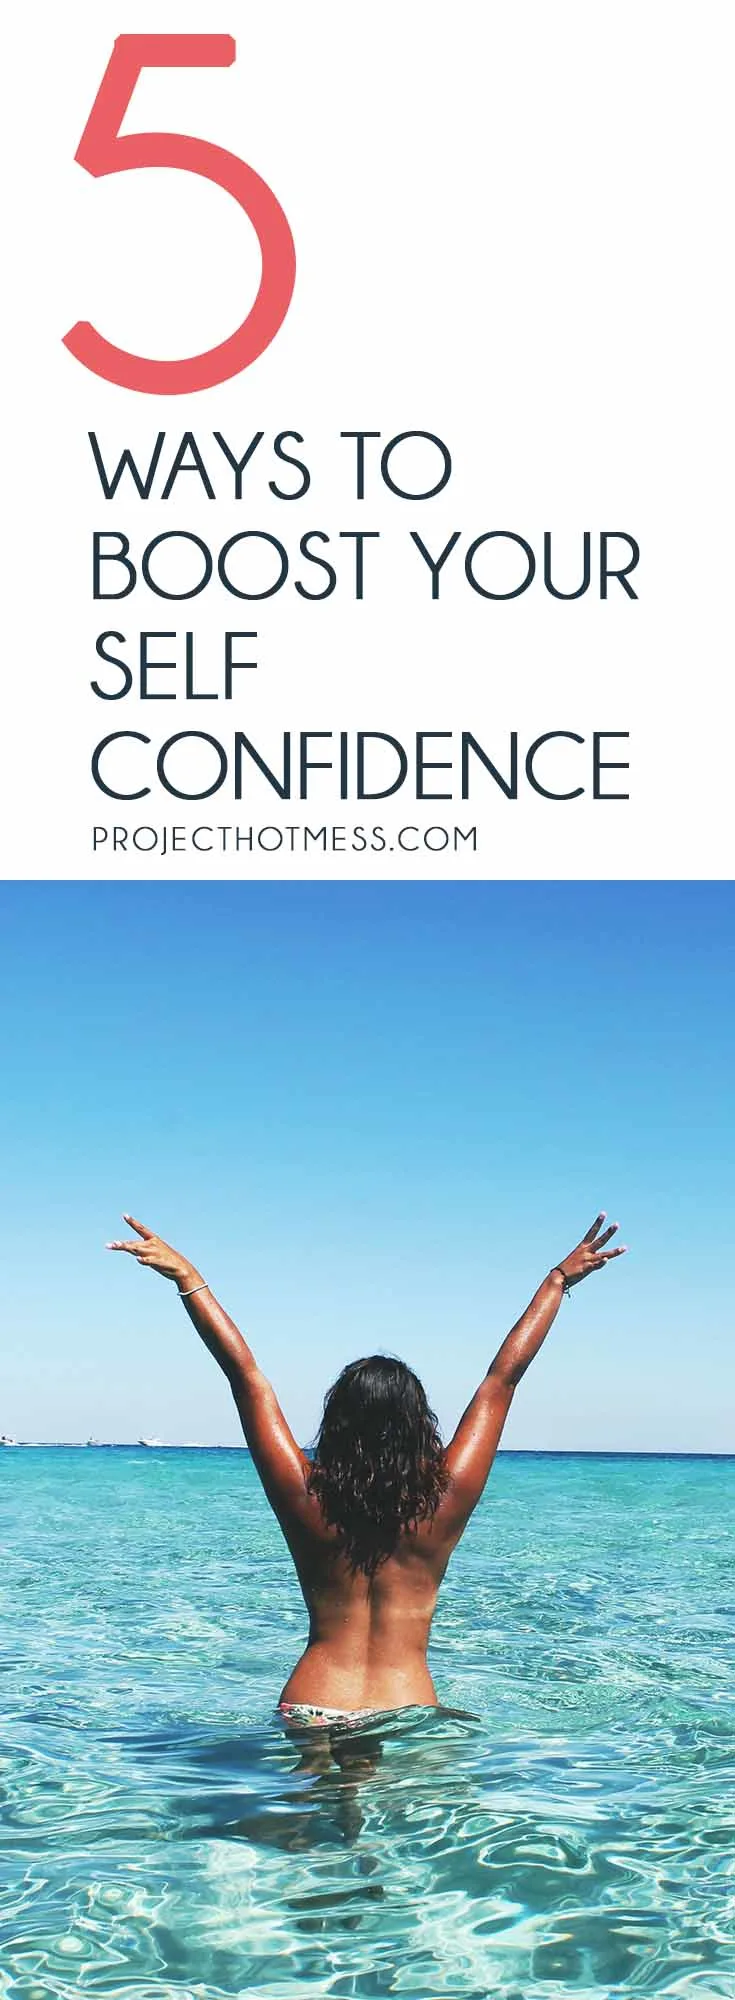 Sometimes all it takes is a few little things to help boost your self confidence and make you feel amazing. Try these 5 things next time you need some help in the self confidence department. You'd be amazed at how effective they are. 